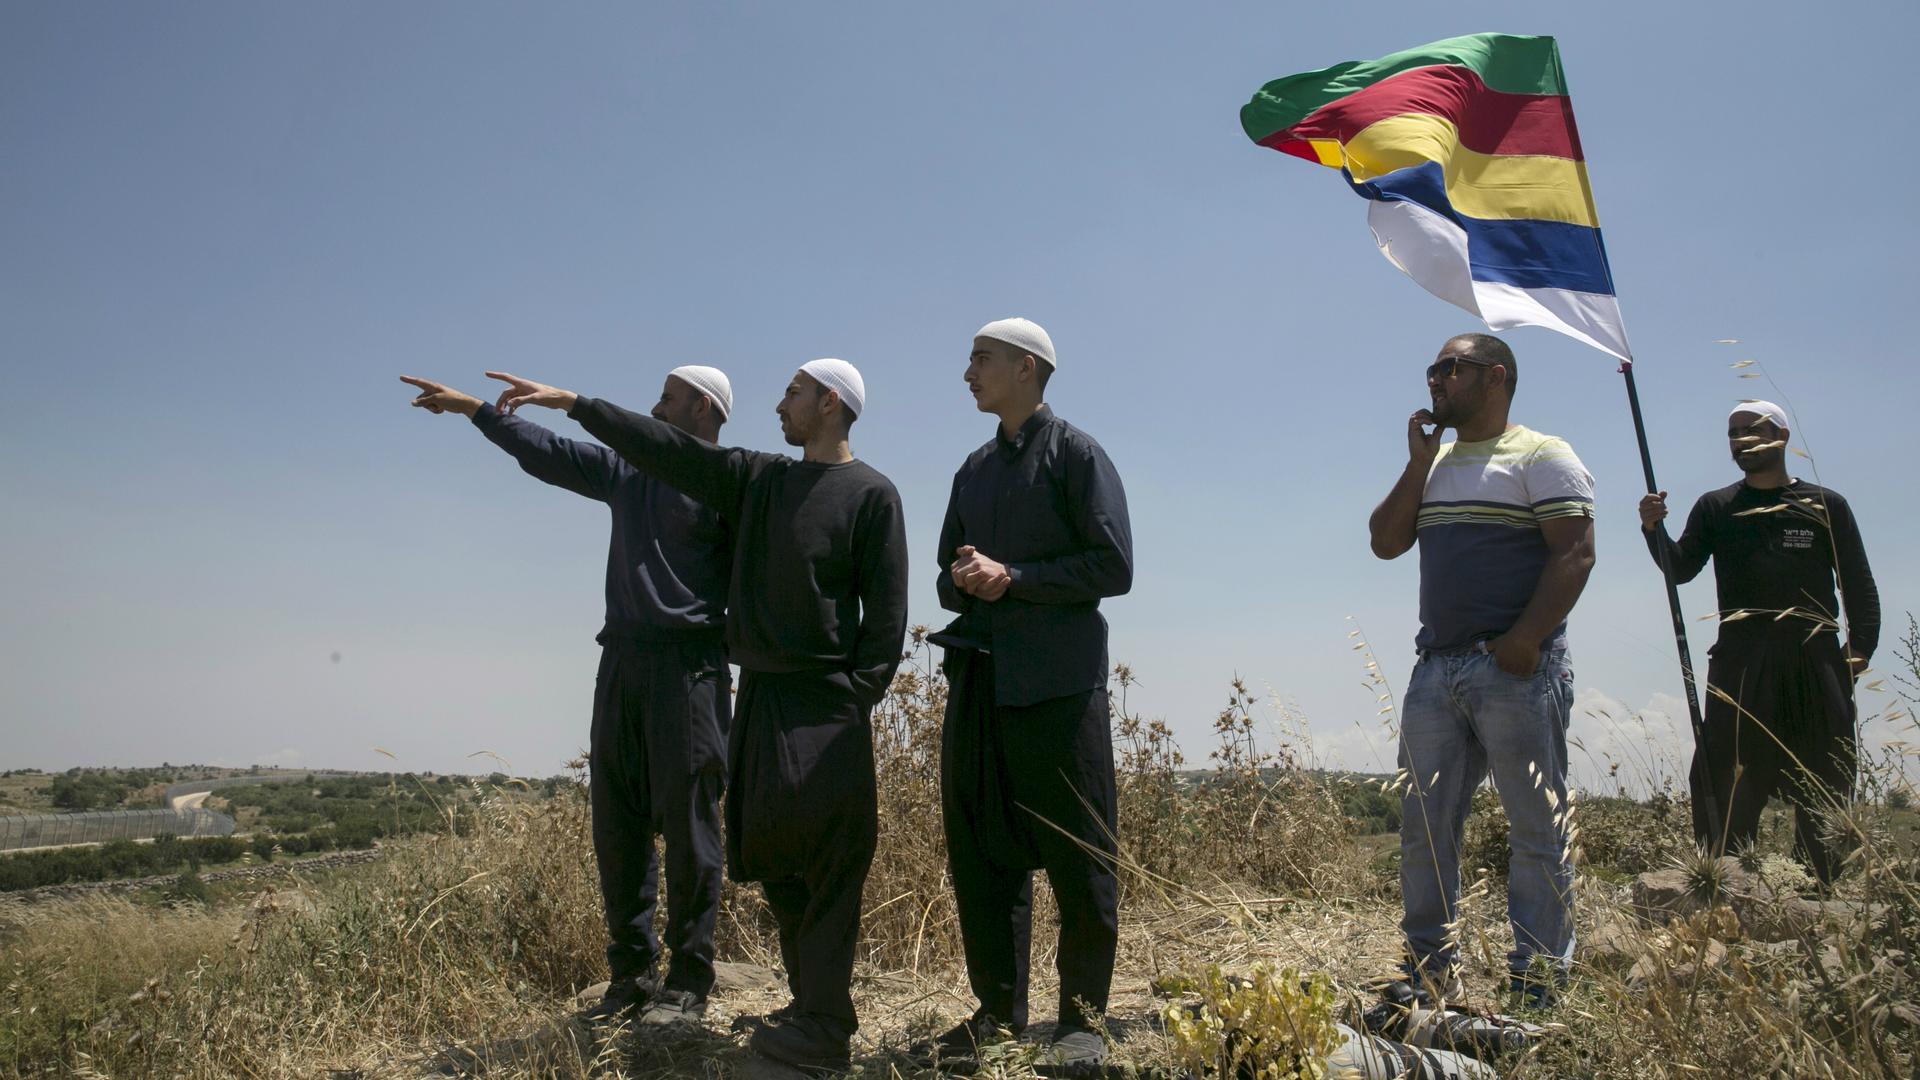 Members of the Druze community watch the fighting in Syria's civil war, next to the border fence between Syria and the Israeli-occupied Golan Heights, near the Druze village of Majdal Shams, June 16, 2015.